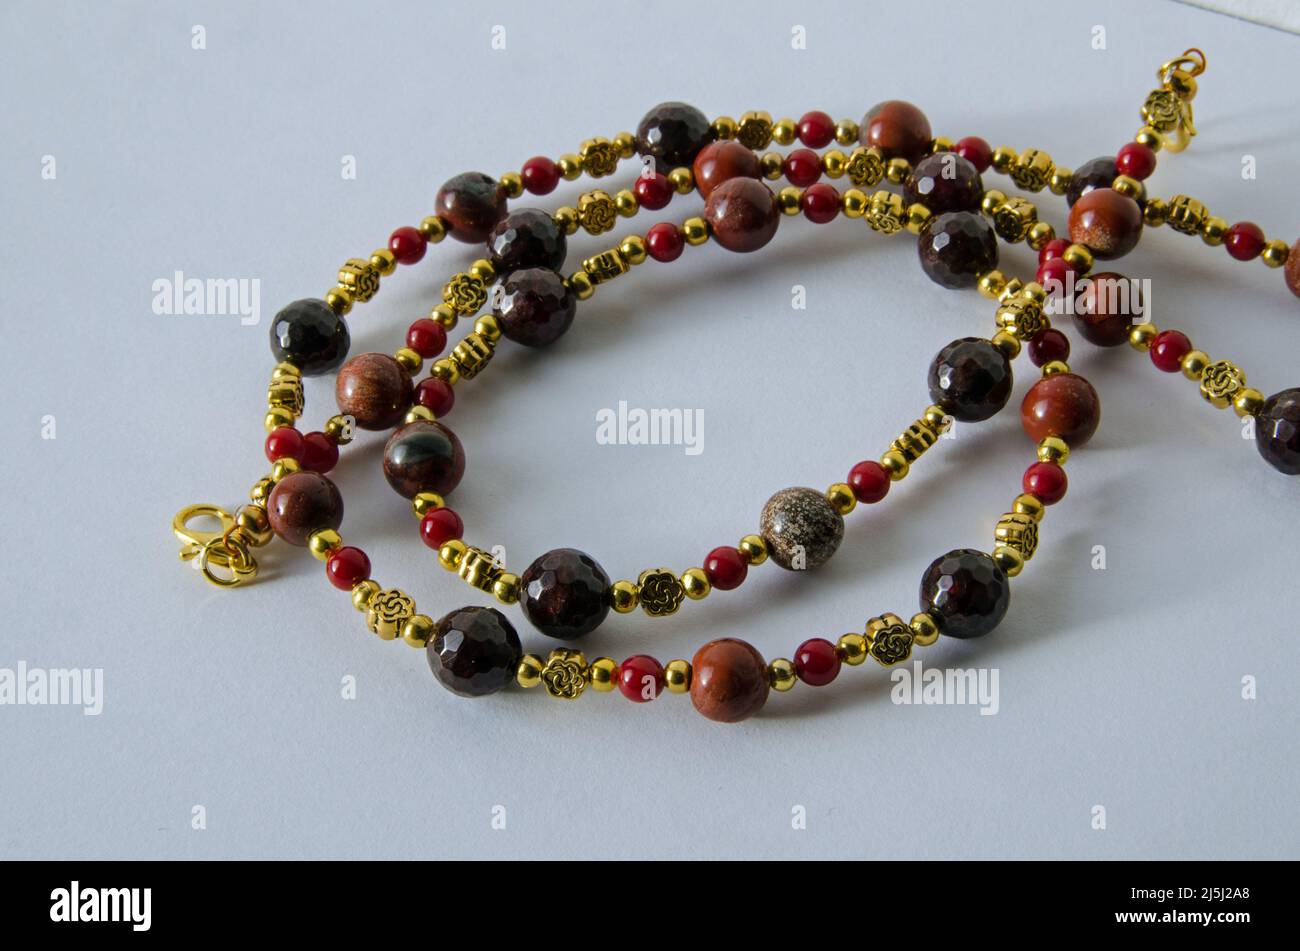 Necklace handmade from beads of garnet, jasper and coral with gold plated findings viewed on a white background. Stock Photo